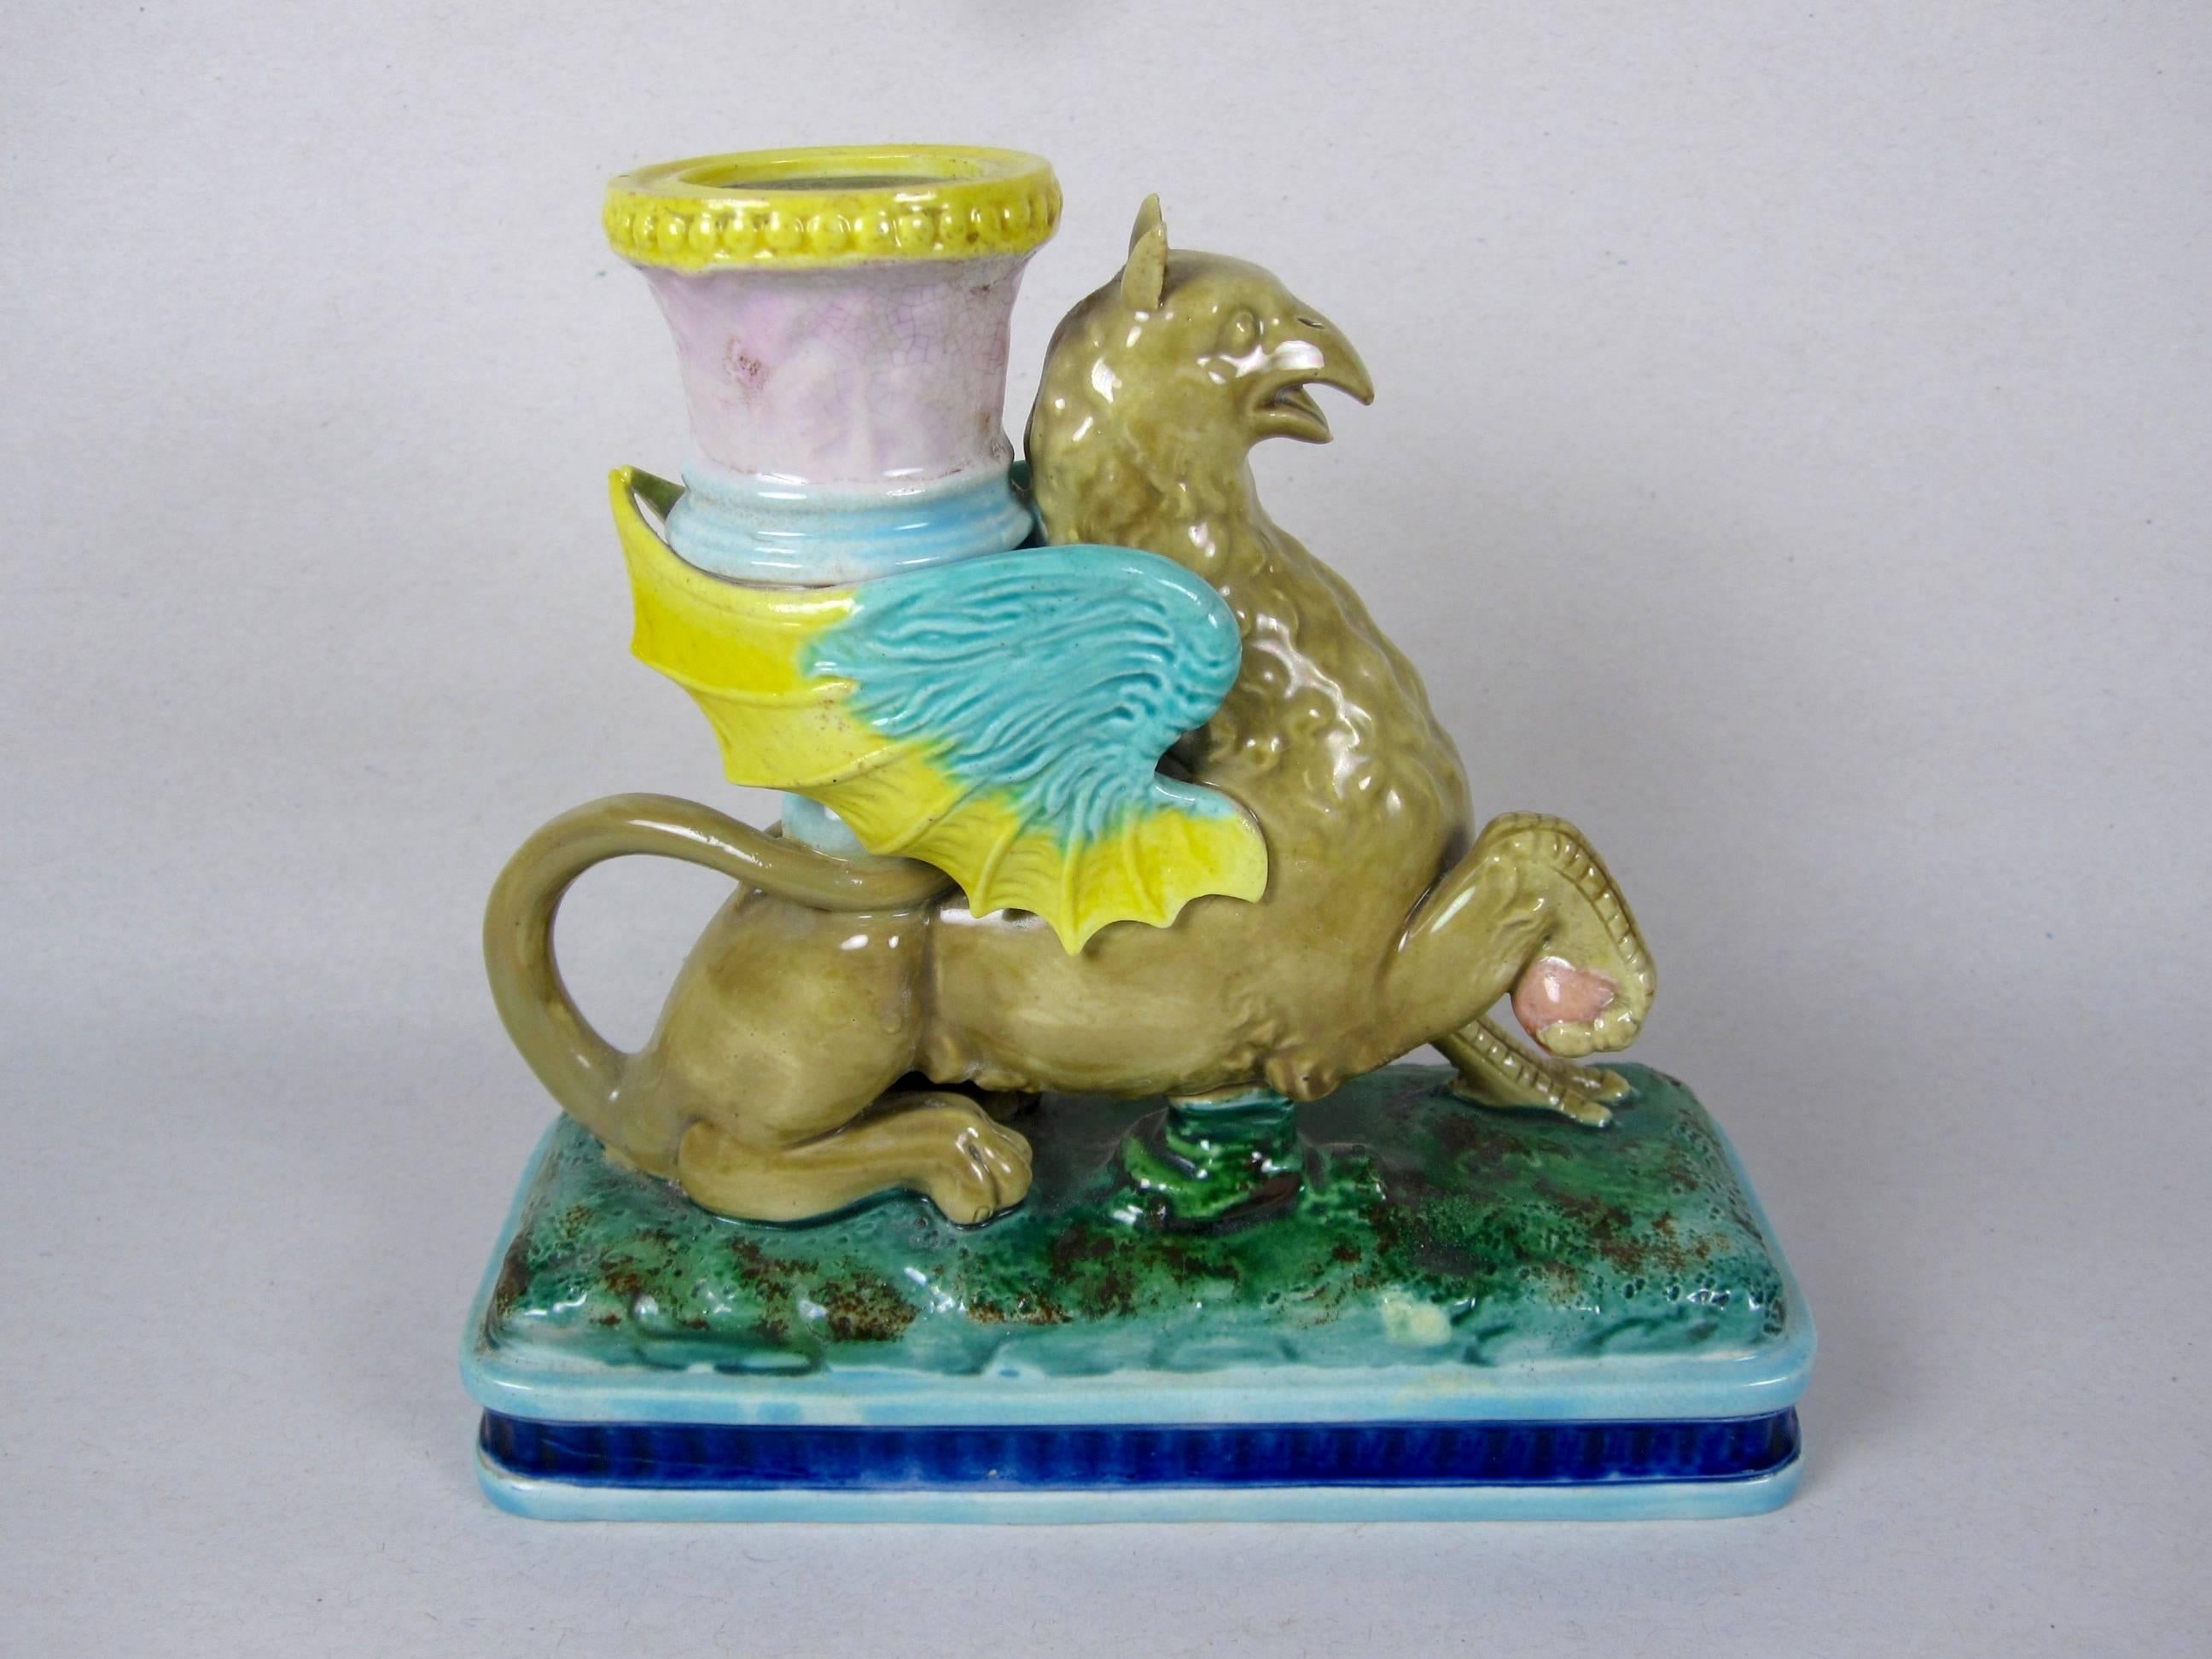 A very scarce Royal Worcester majolica chamber stick, circa 1875. Modeled as a winged Griffin supporting a candleholder, set on a rectangular pedestal base. Wonderful color and mold work, stamped with the Royal Worcester Crown Crest.